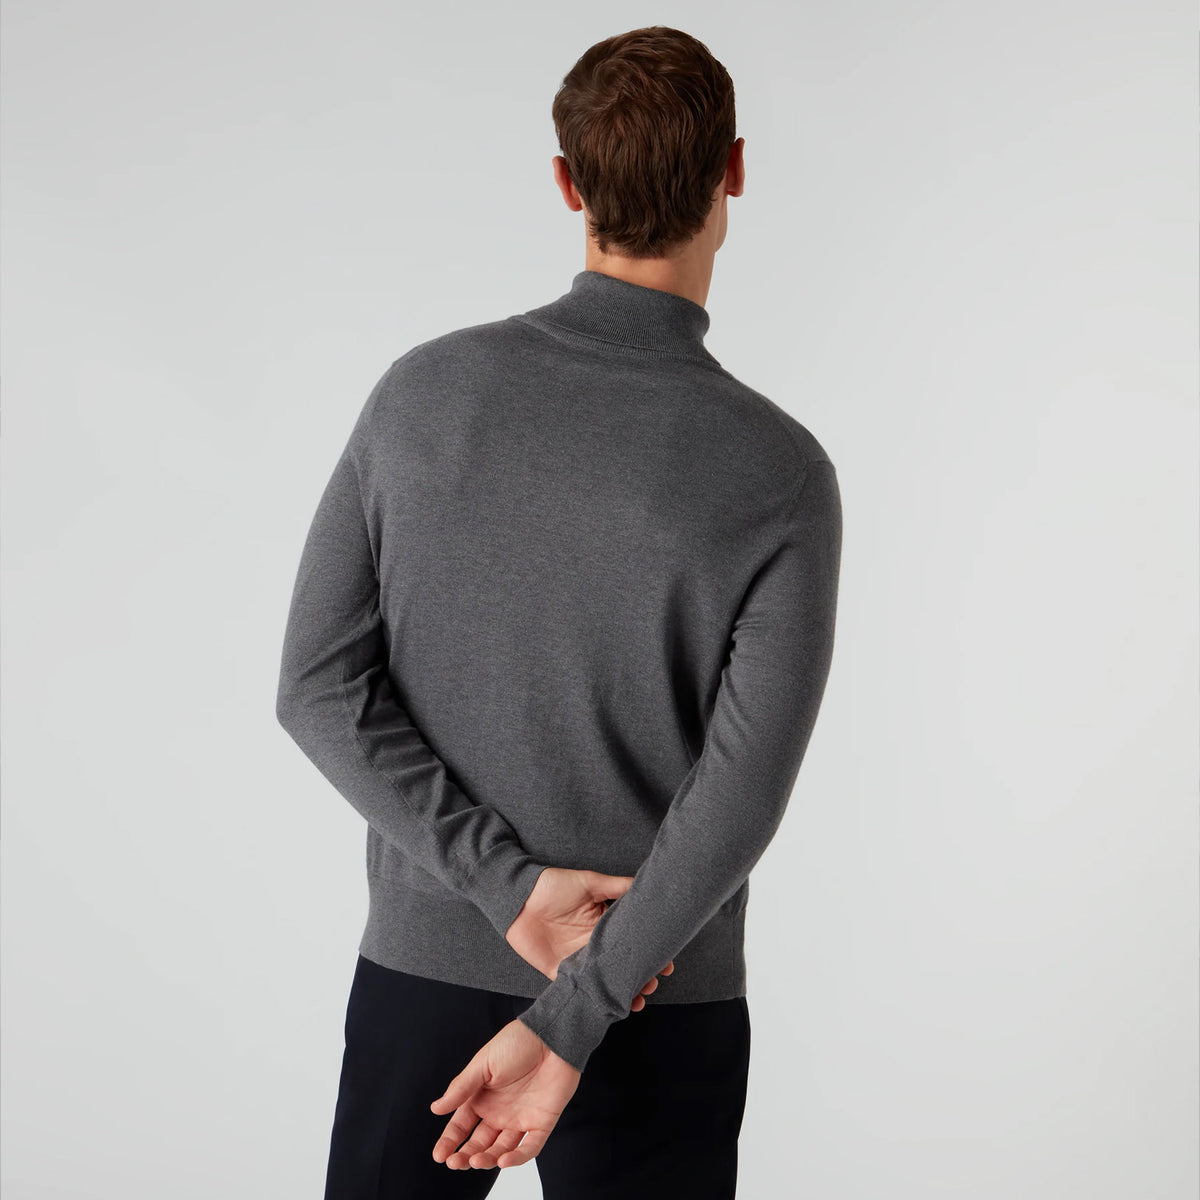 James Bond Roll Neck Sweater - You Only Live Twice Edition - By N. Peal